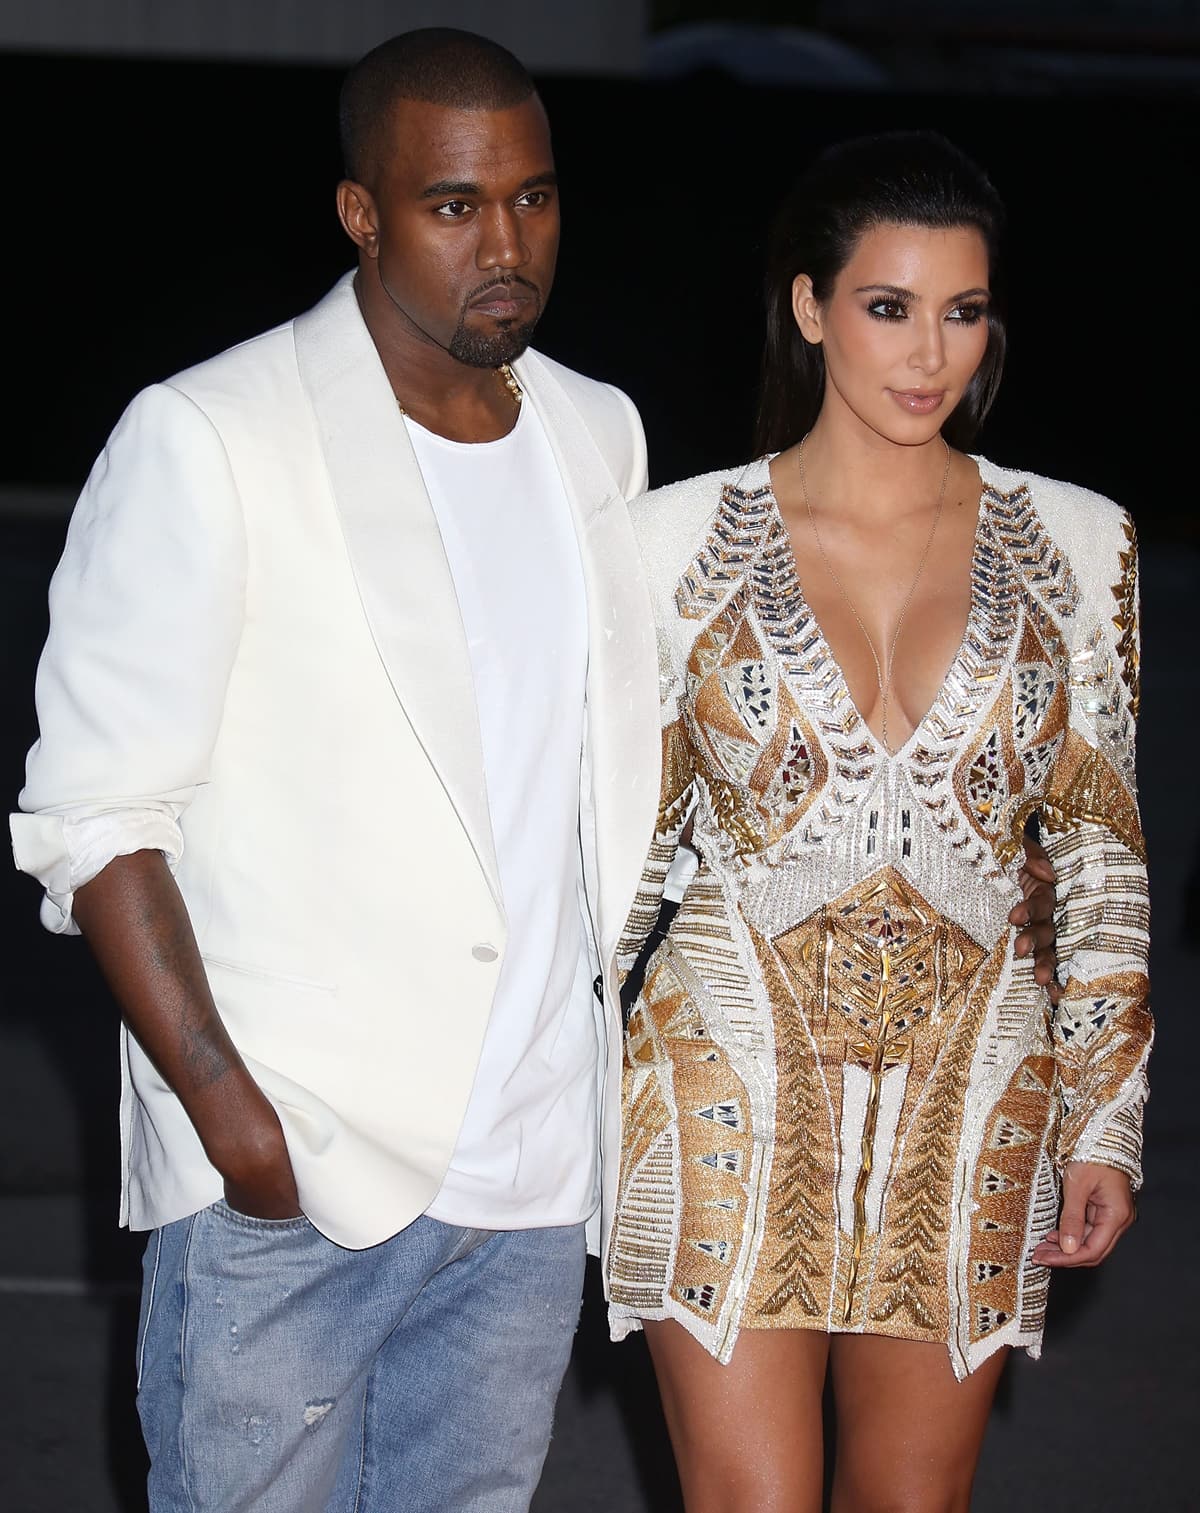 5′ 2″ tall reality star Kim Kardashian is about 6 inches shorter than her ex-husband Kanye West